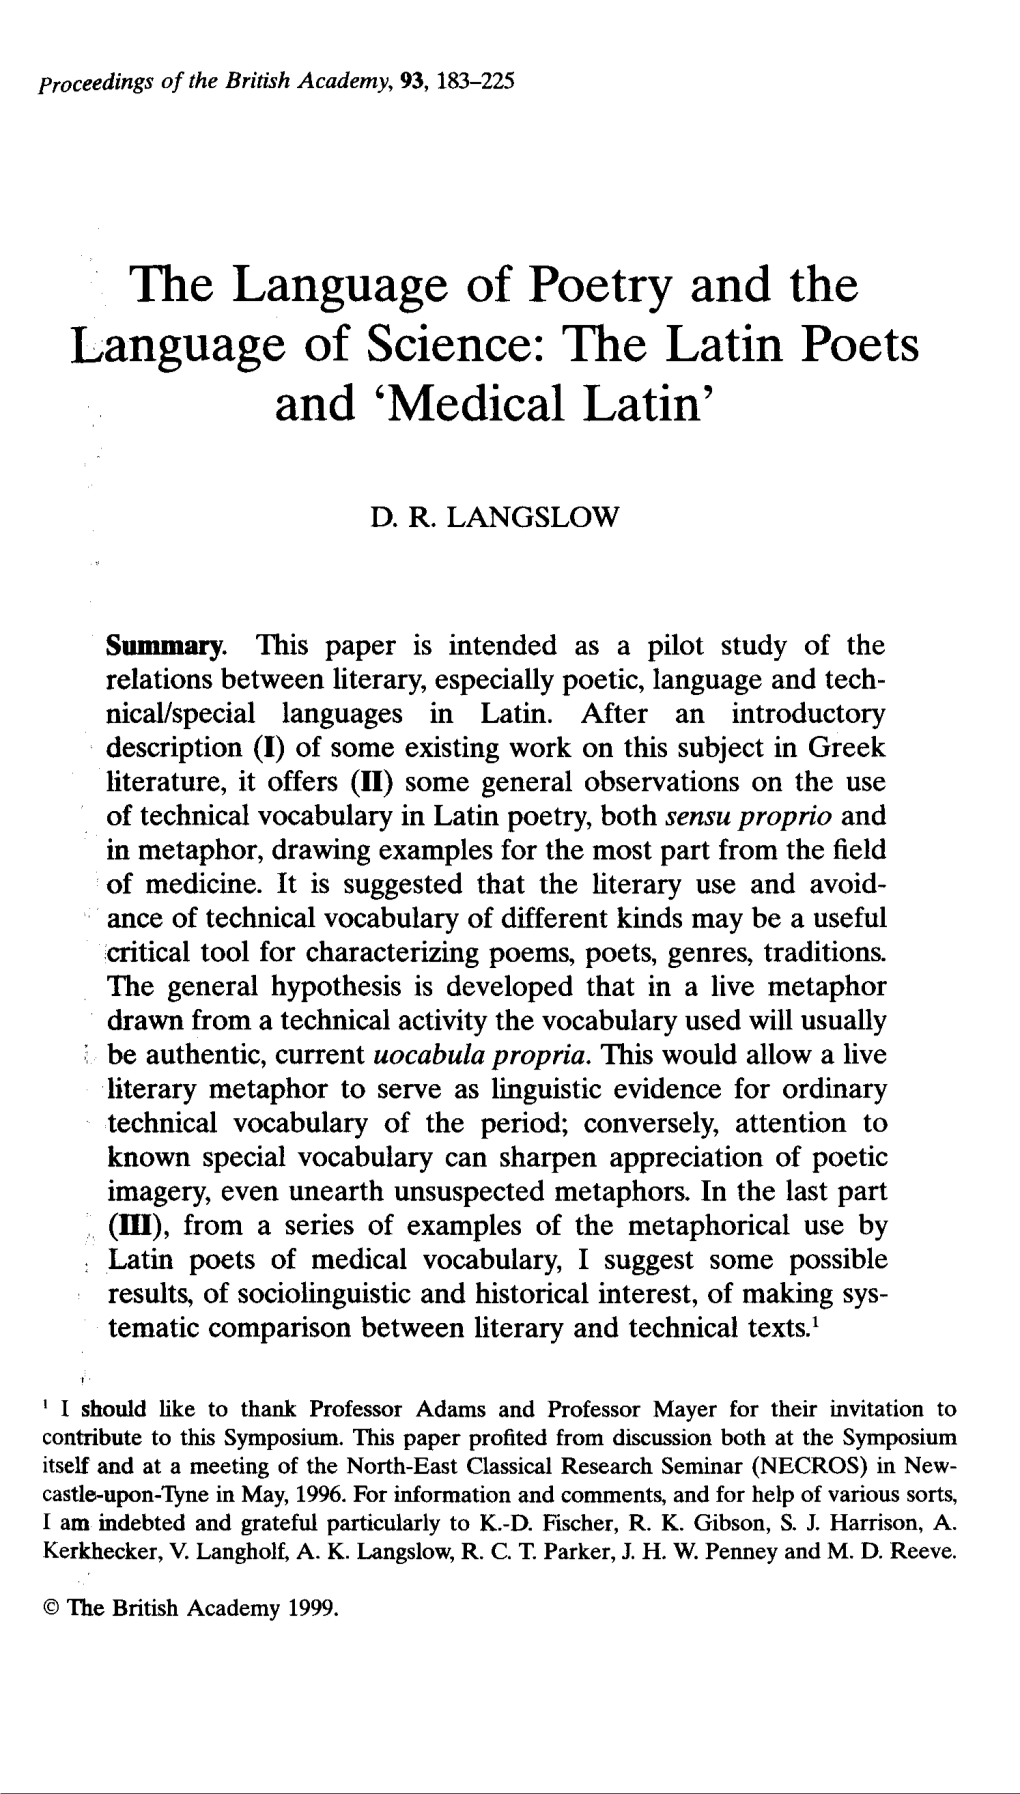 The Latin Poets and ‘Medical Latin’